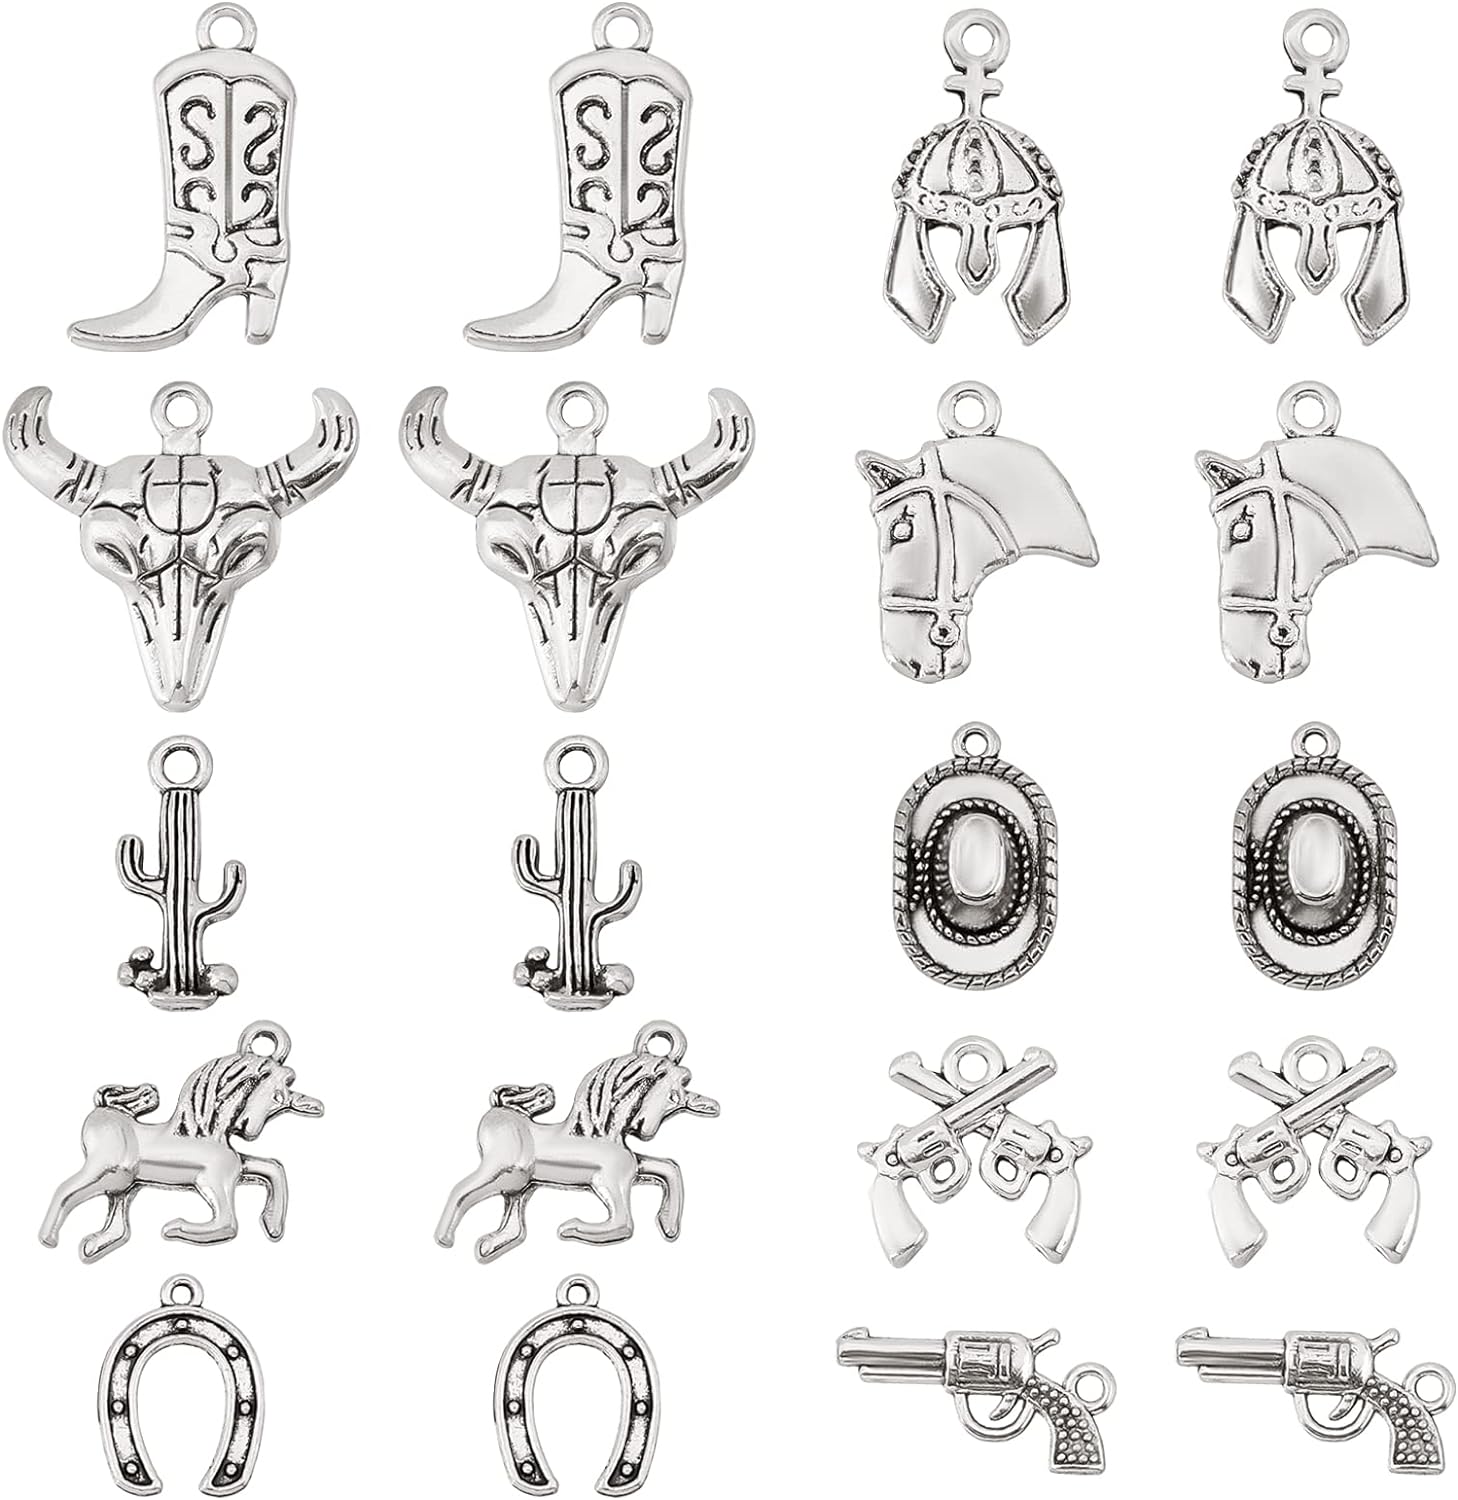  YETOOME 48 Pieces Western Cowboy Charms for Jewelry